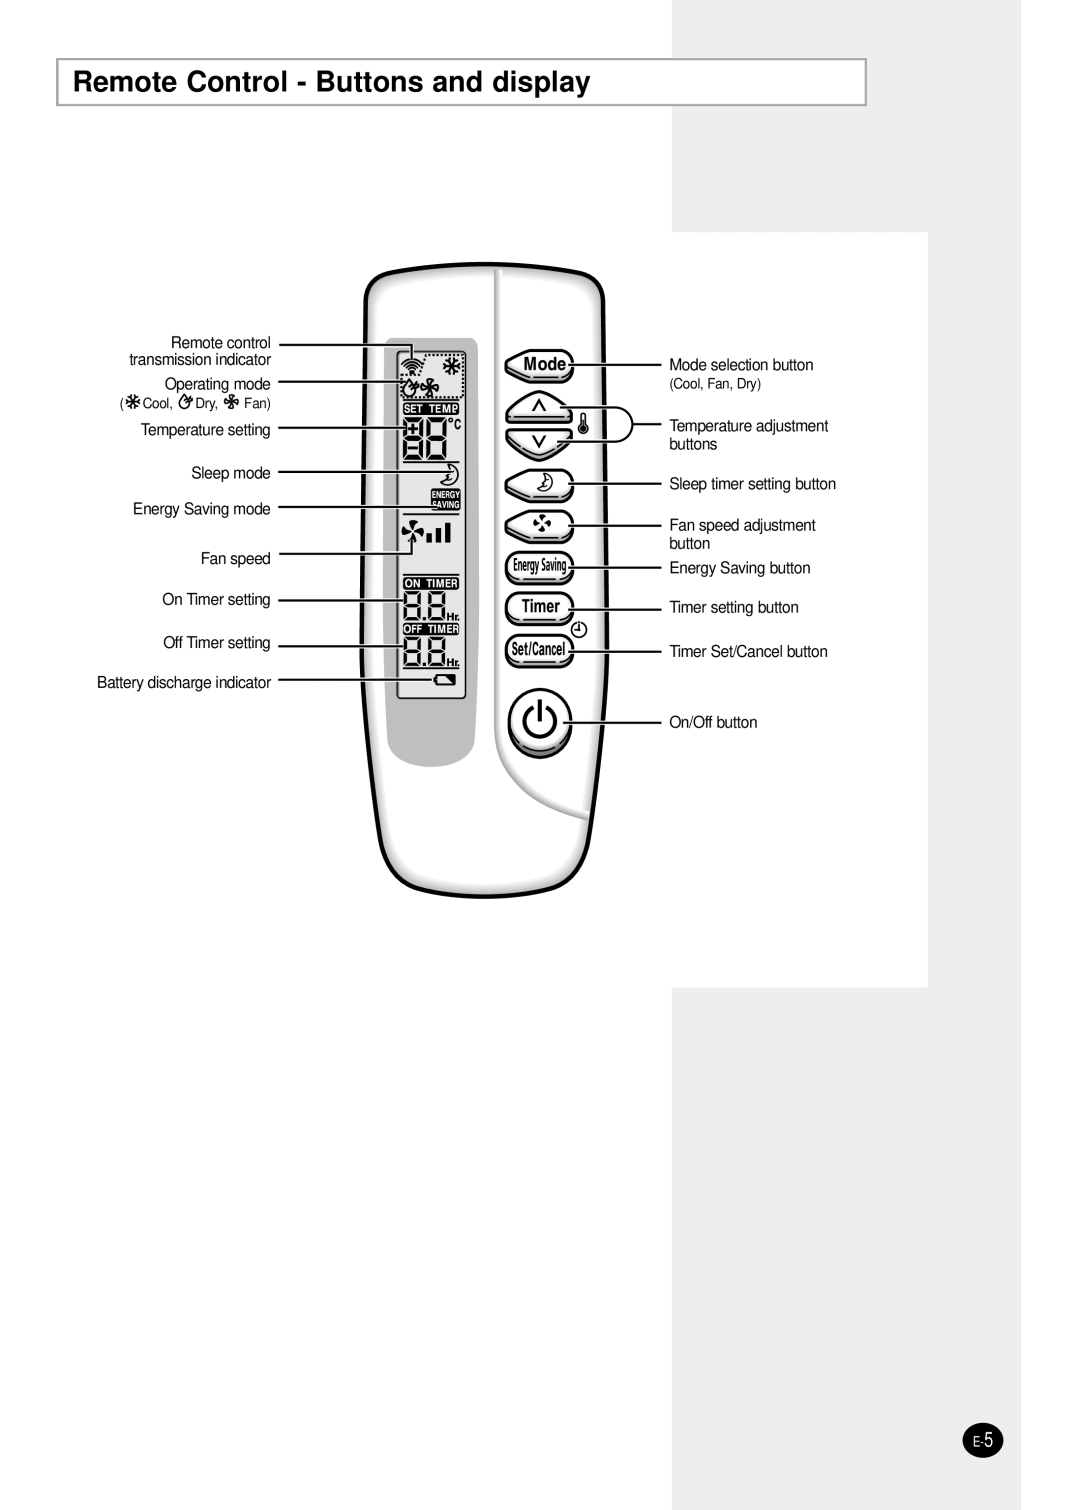 Samsung AW1291L manual Remote Control - Buttons and display 